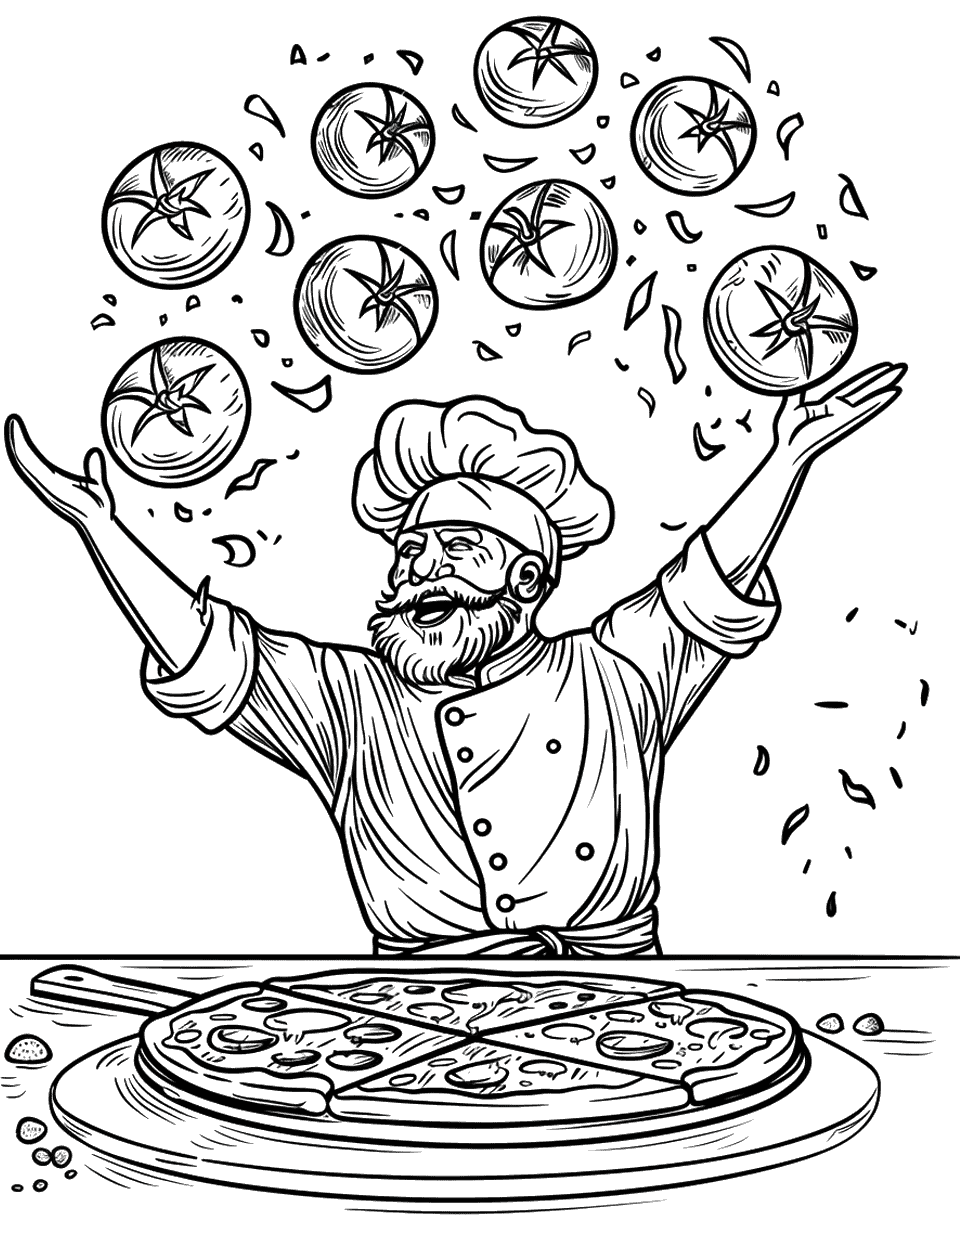 Tomato Toss Pizza Coloring Page - A cheerful chef throwing huge tomatoes up in the air, with a pizza base ready on the table.